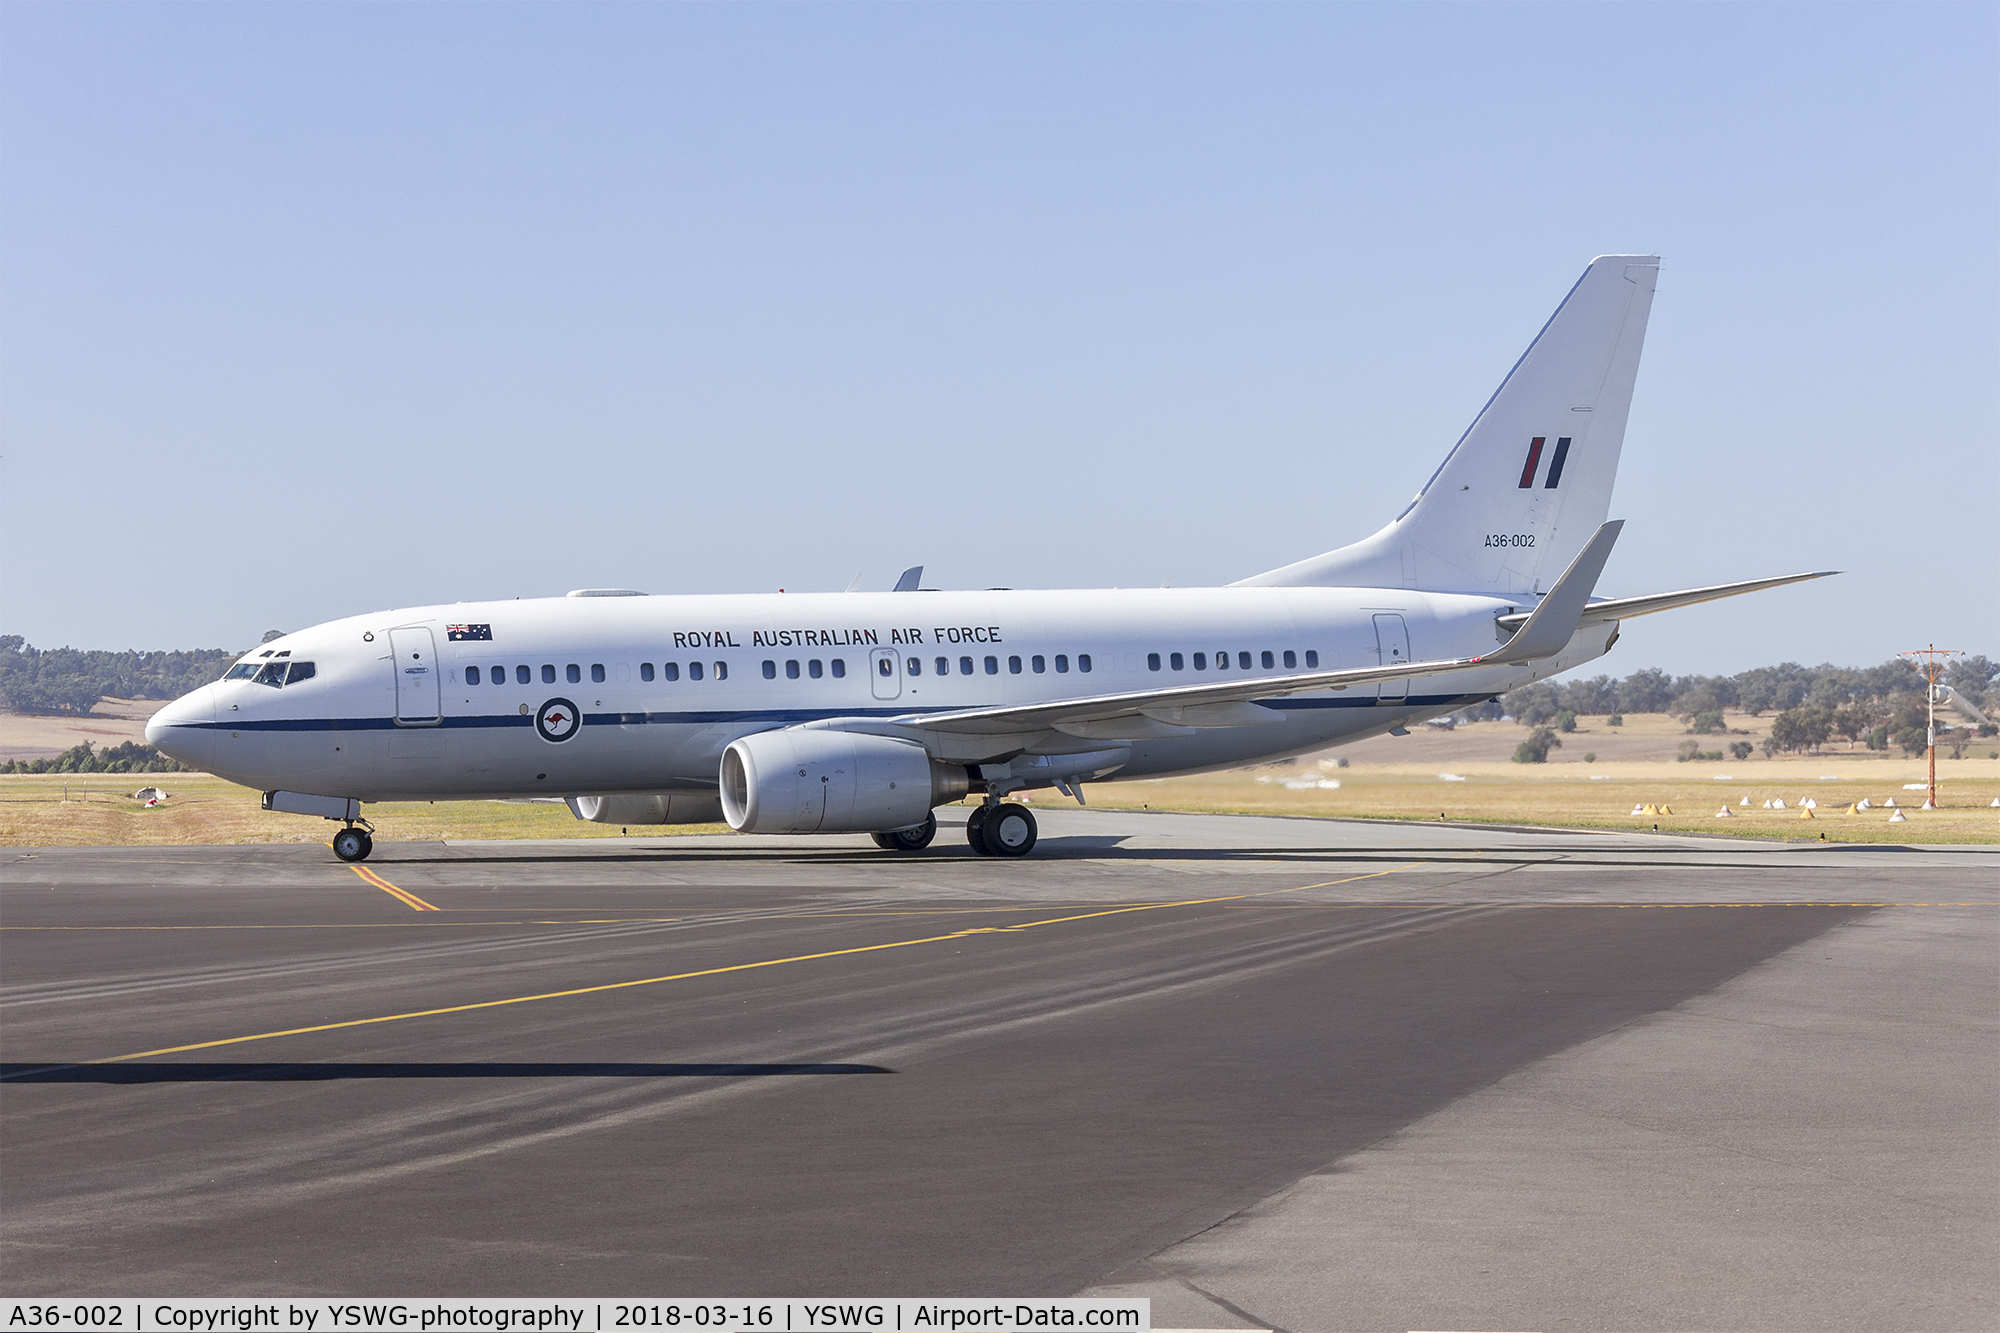 A36-002, 2000 Boeing 737-7DF C/N 30790/613, Royal Australian Air Force (A36-002) Boeing 737-7DT (BBJ) taxiing at Wagga Wagga Airport.